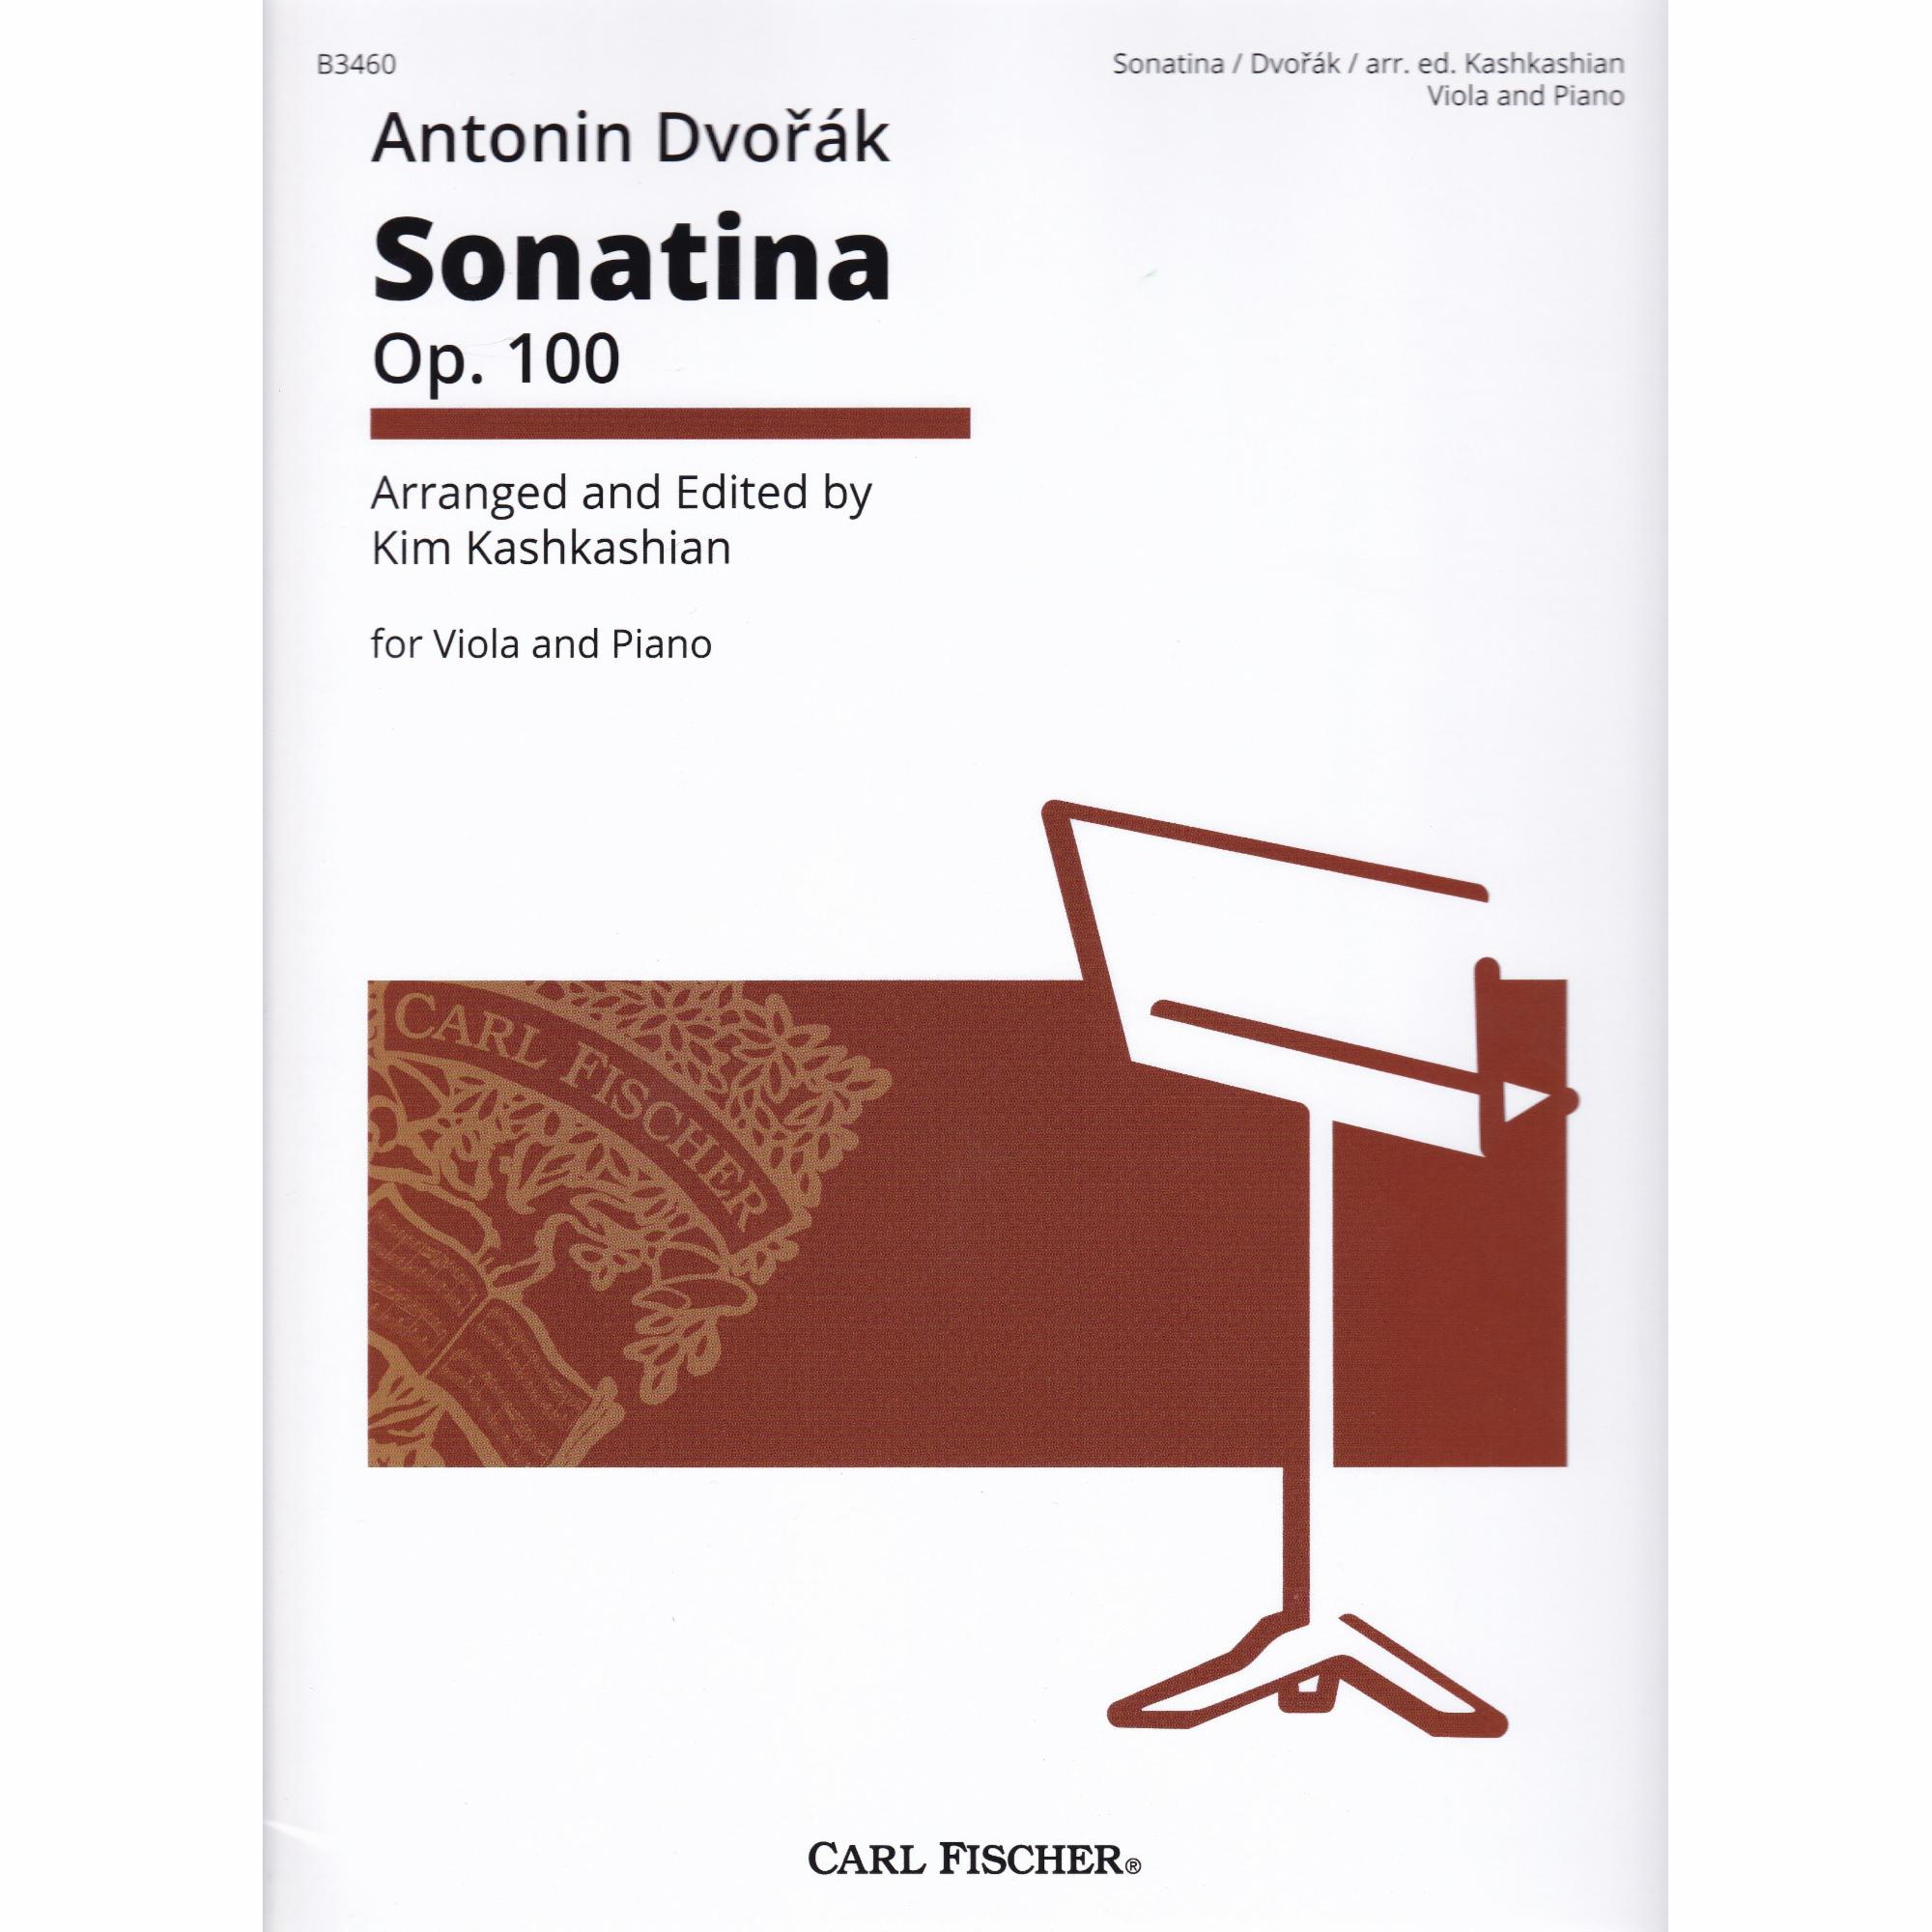 Sonatina in G Major for Viola and Piano, Op. 100